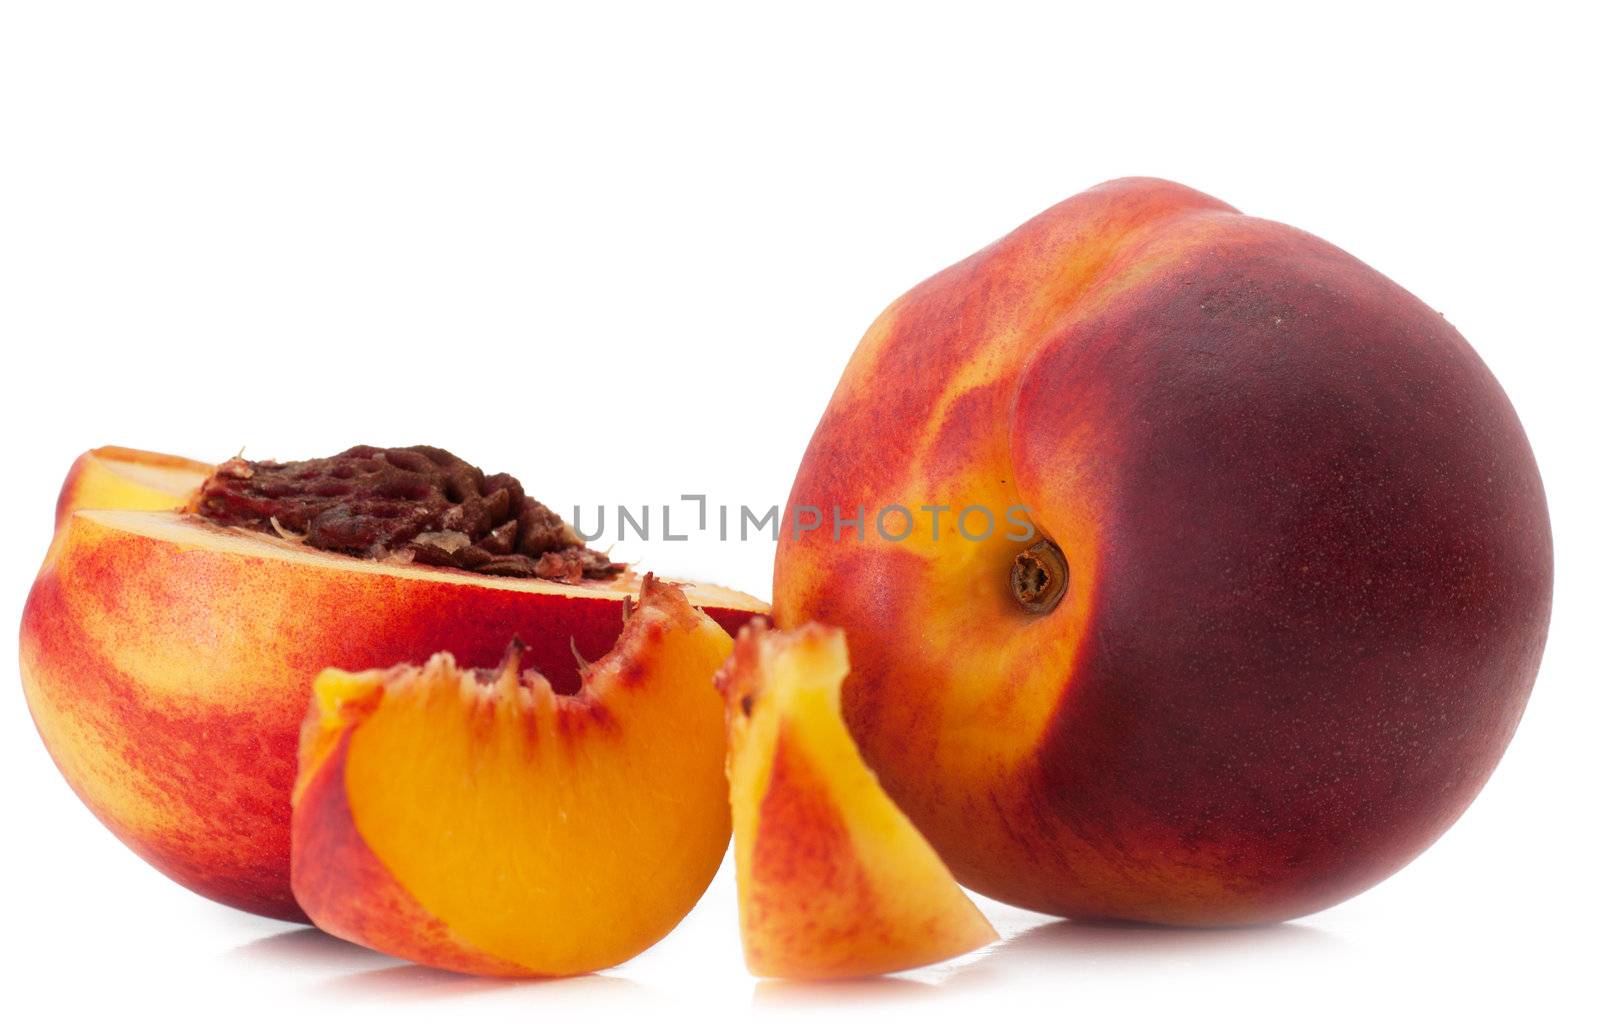 Tasty juicy peaches and slices of peaches on a white background